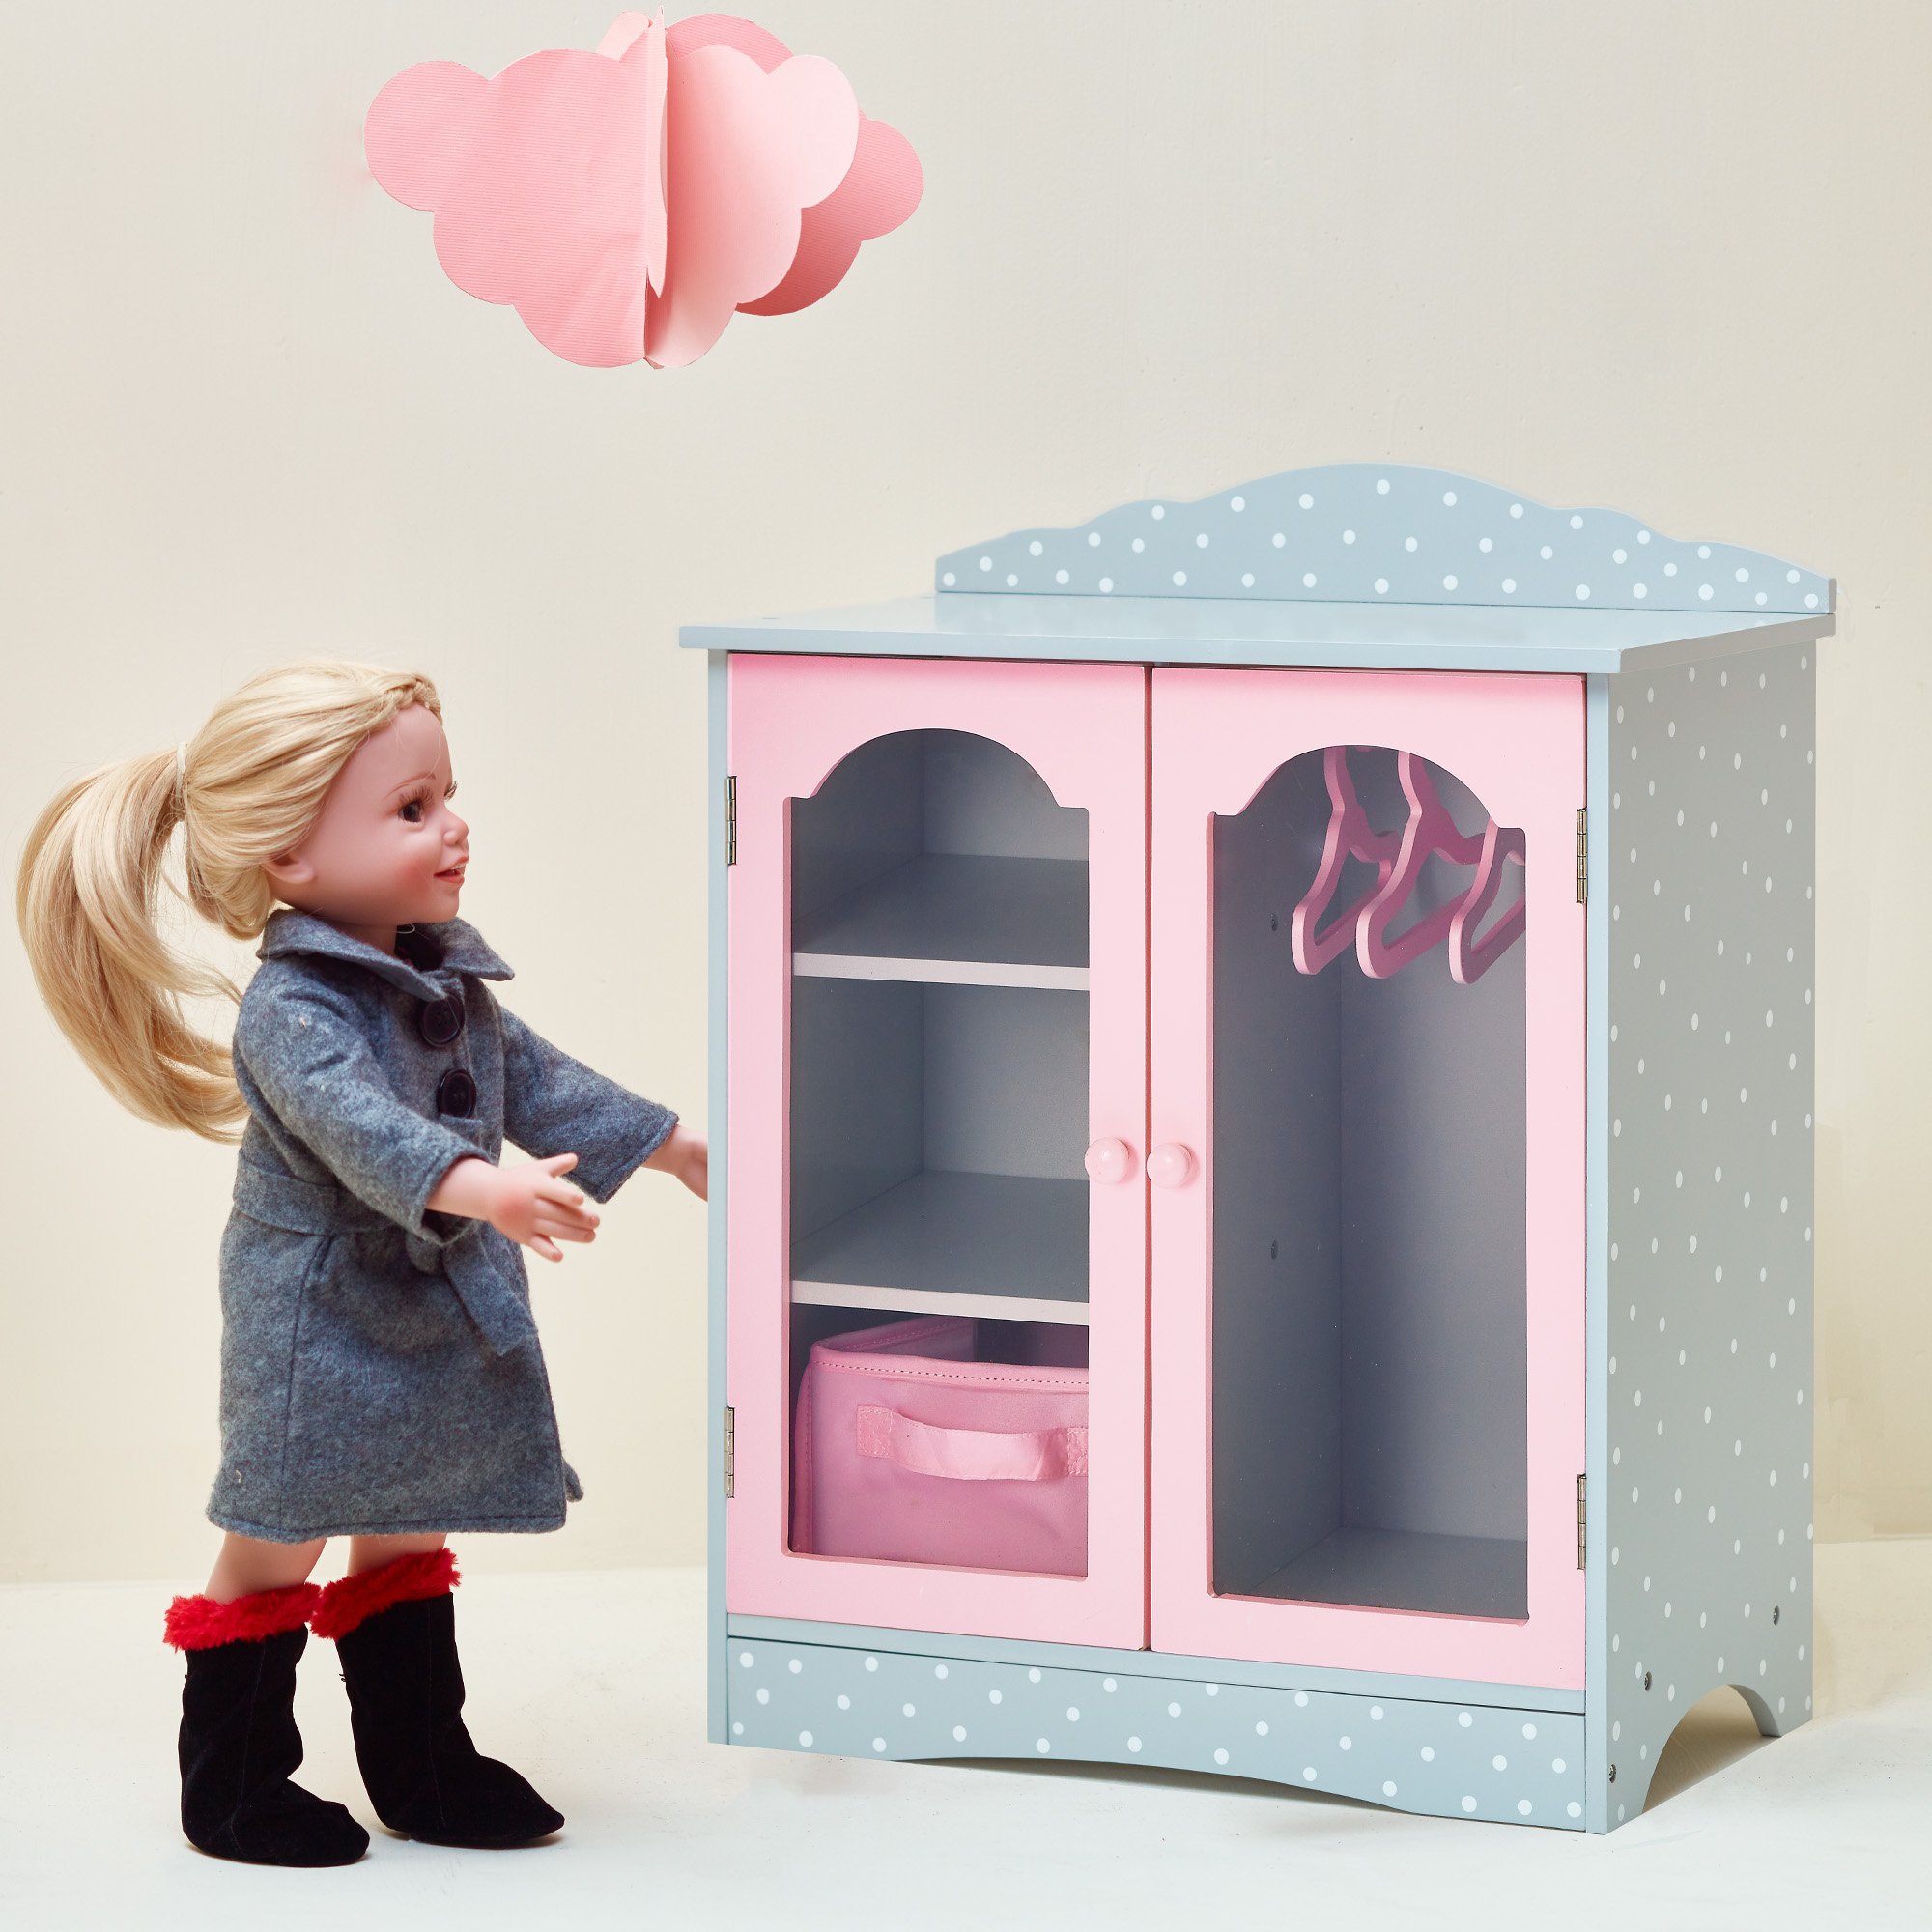 Olivia's Little World - Polka Dots Princess 18 inch Doll Wooden Closet with 3 Hangers, Fits American Girls, Our Generation Dolls, Doll Furniture, Accessories and Clothes Storage - Pink & Gray